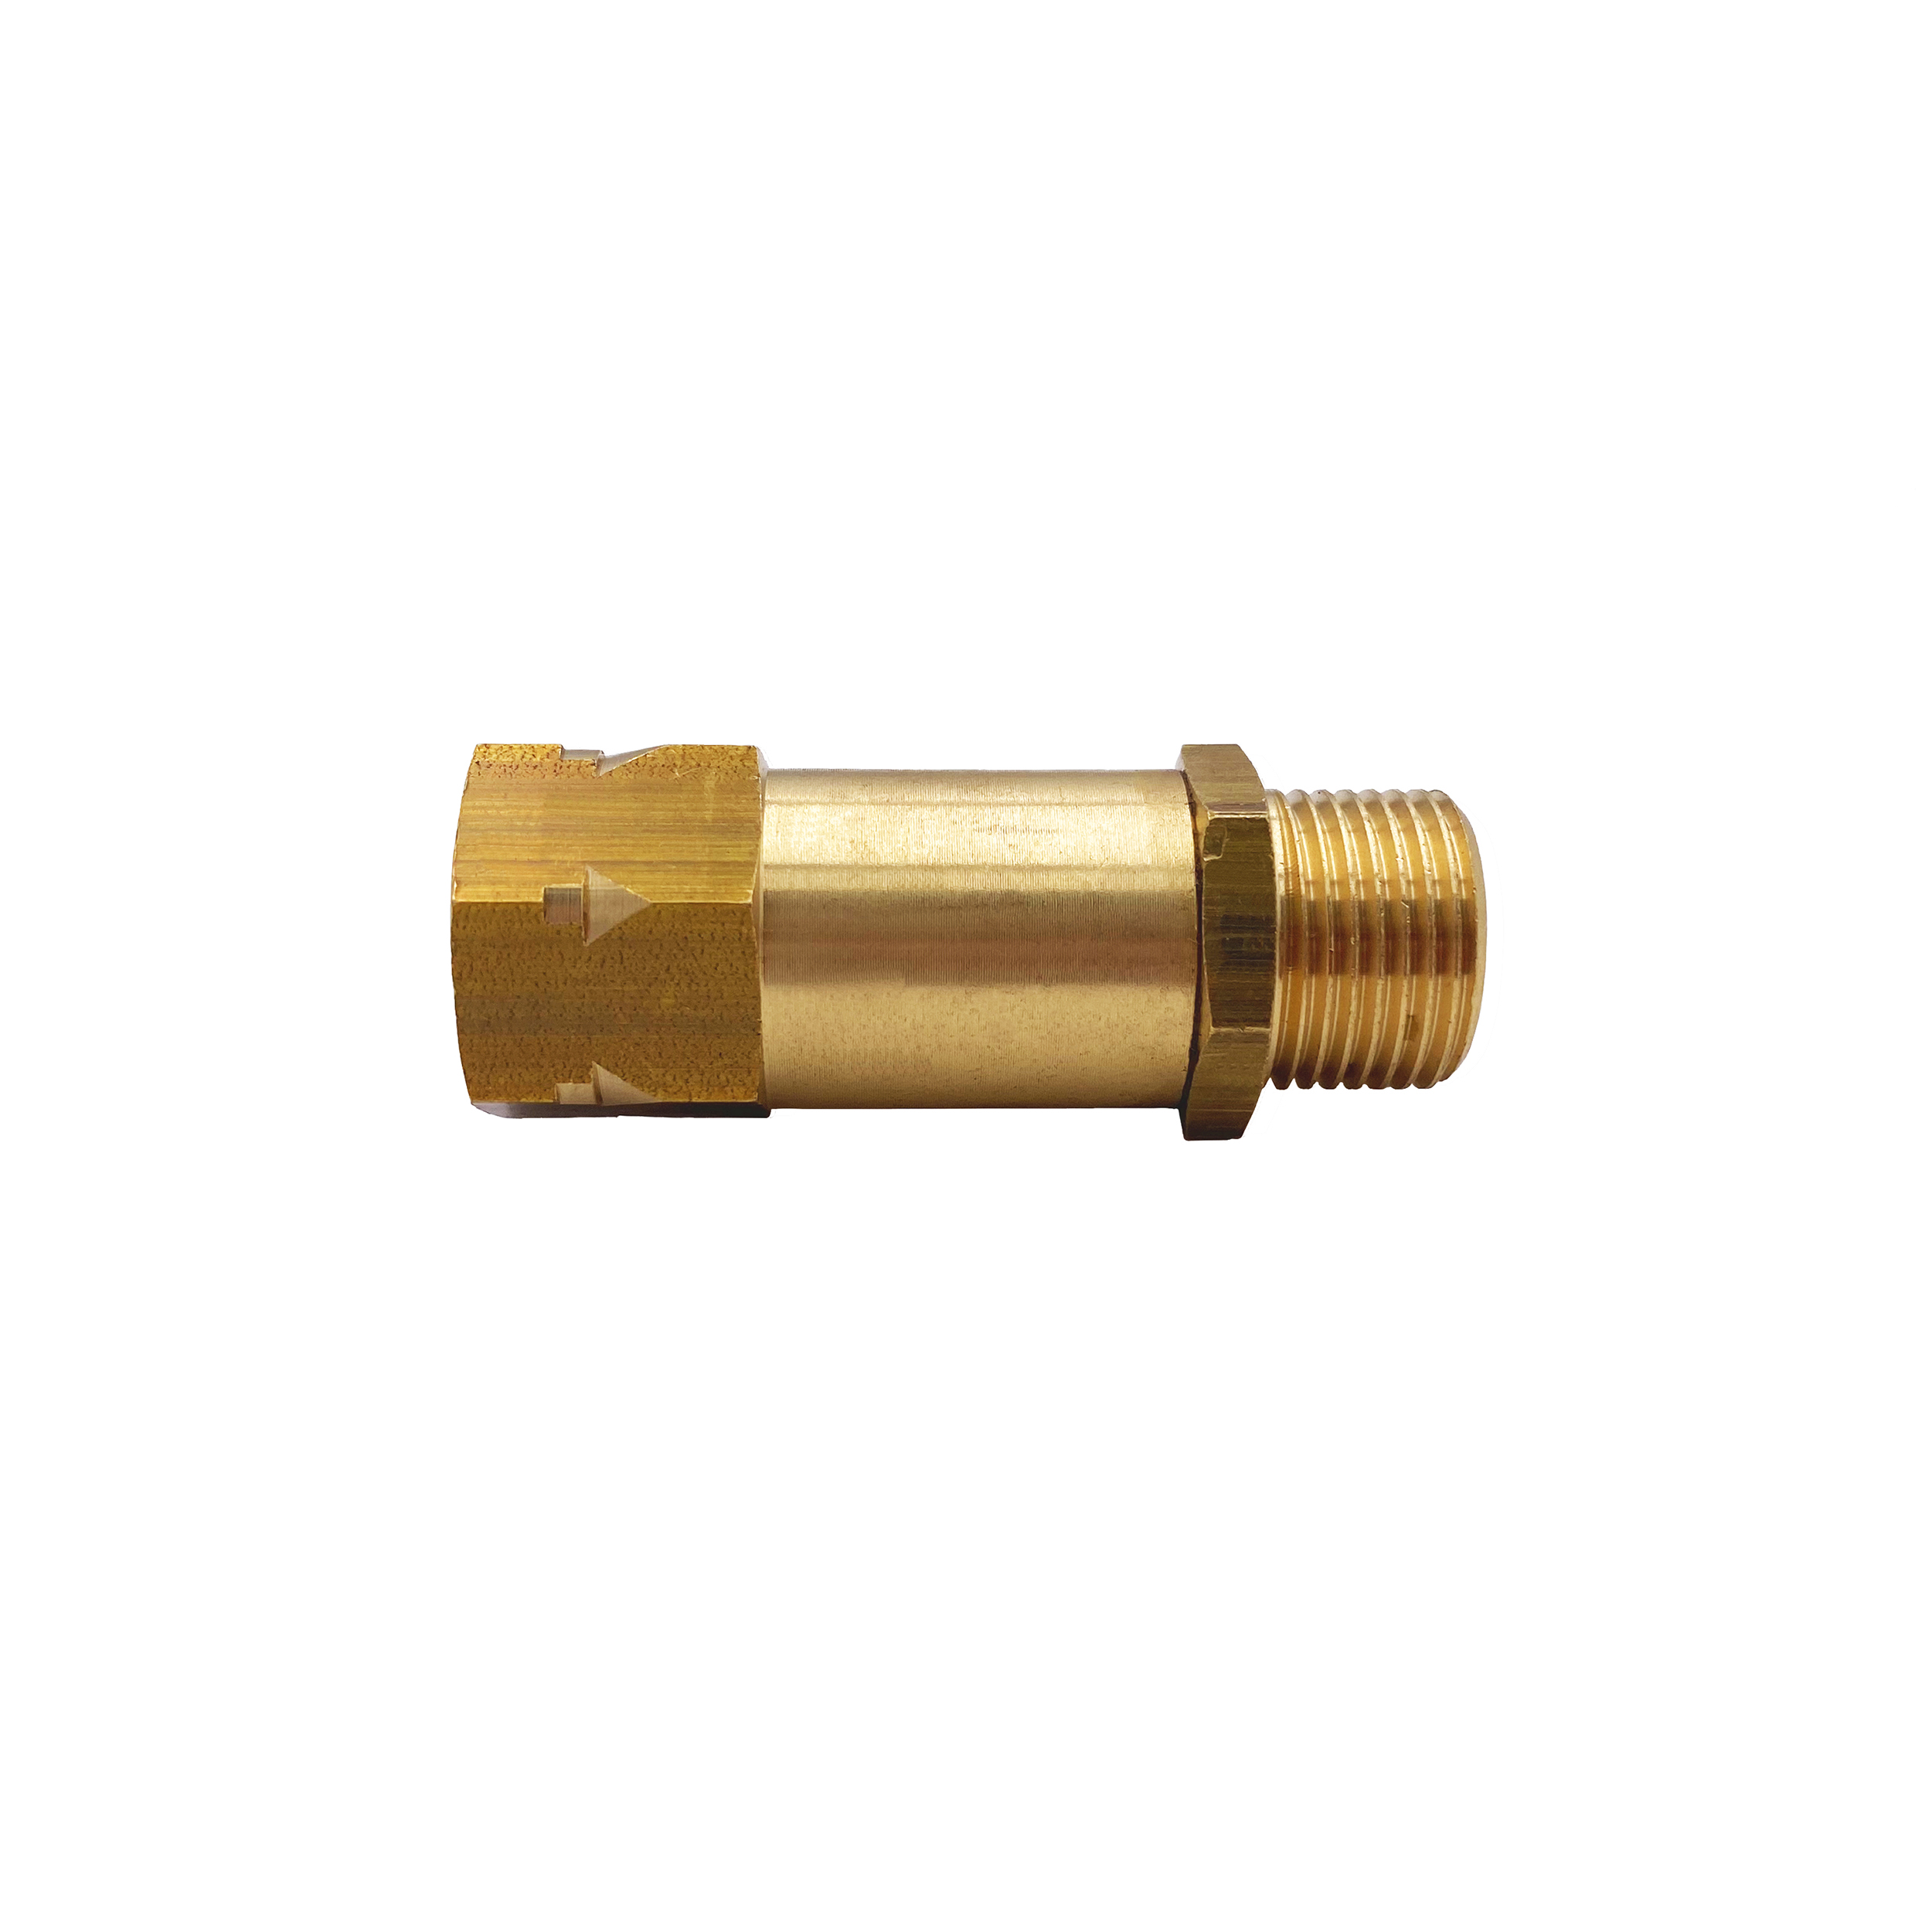 Check valve, straight way type, soft seal: FKM, PC: ~1.45 psi, G¼ female–male, DN 8, length: 48,5 mm, i: 6.5 mm, AF 22